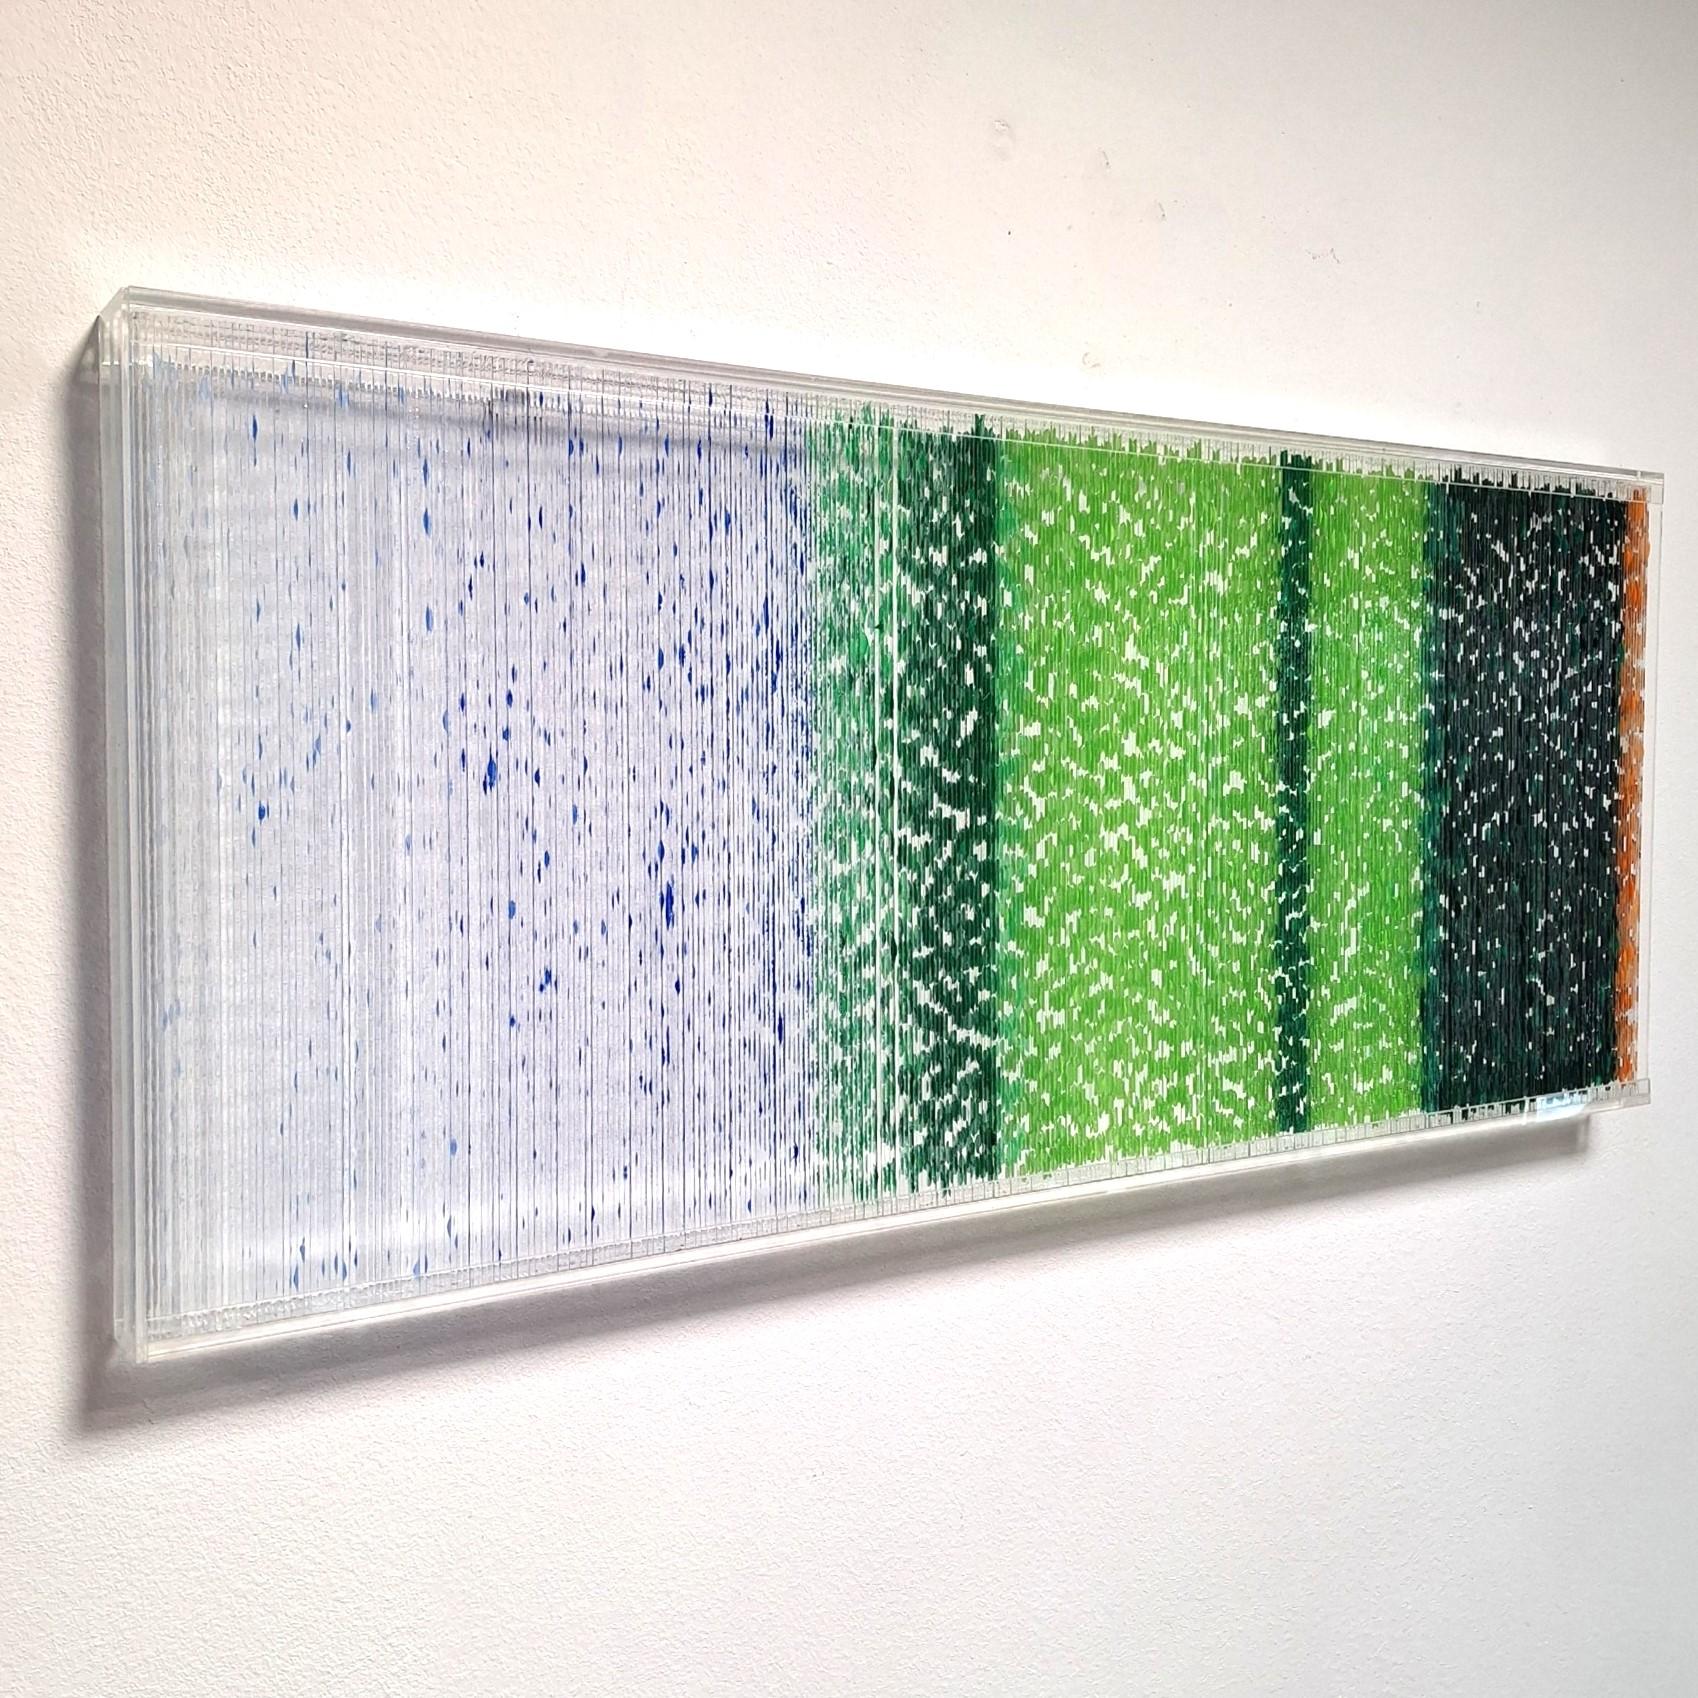 Farbenlichthaut no. 167 is a contemporary modern organic sculpture painting relief by German artist Freddie Michael Soethout. The relief is made from a few hundred of hand-cut two millimeter thick glass strips covered with a dotted organic pattern